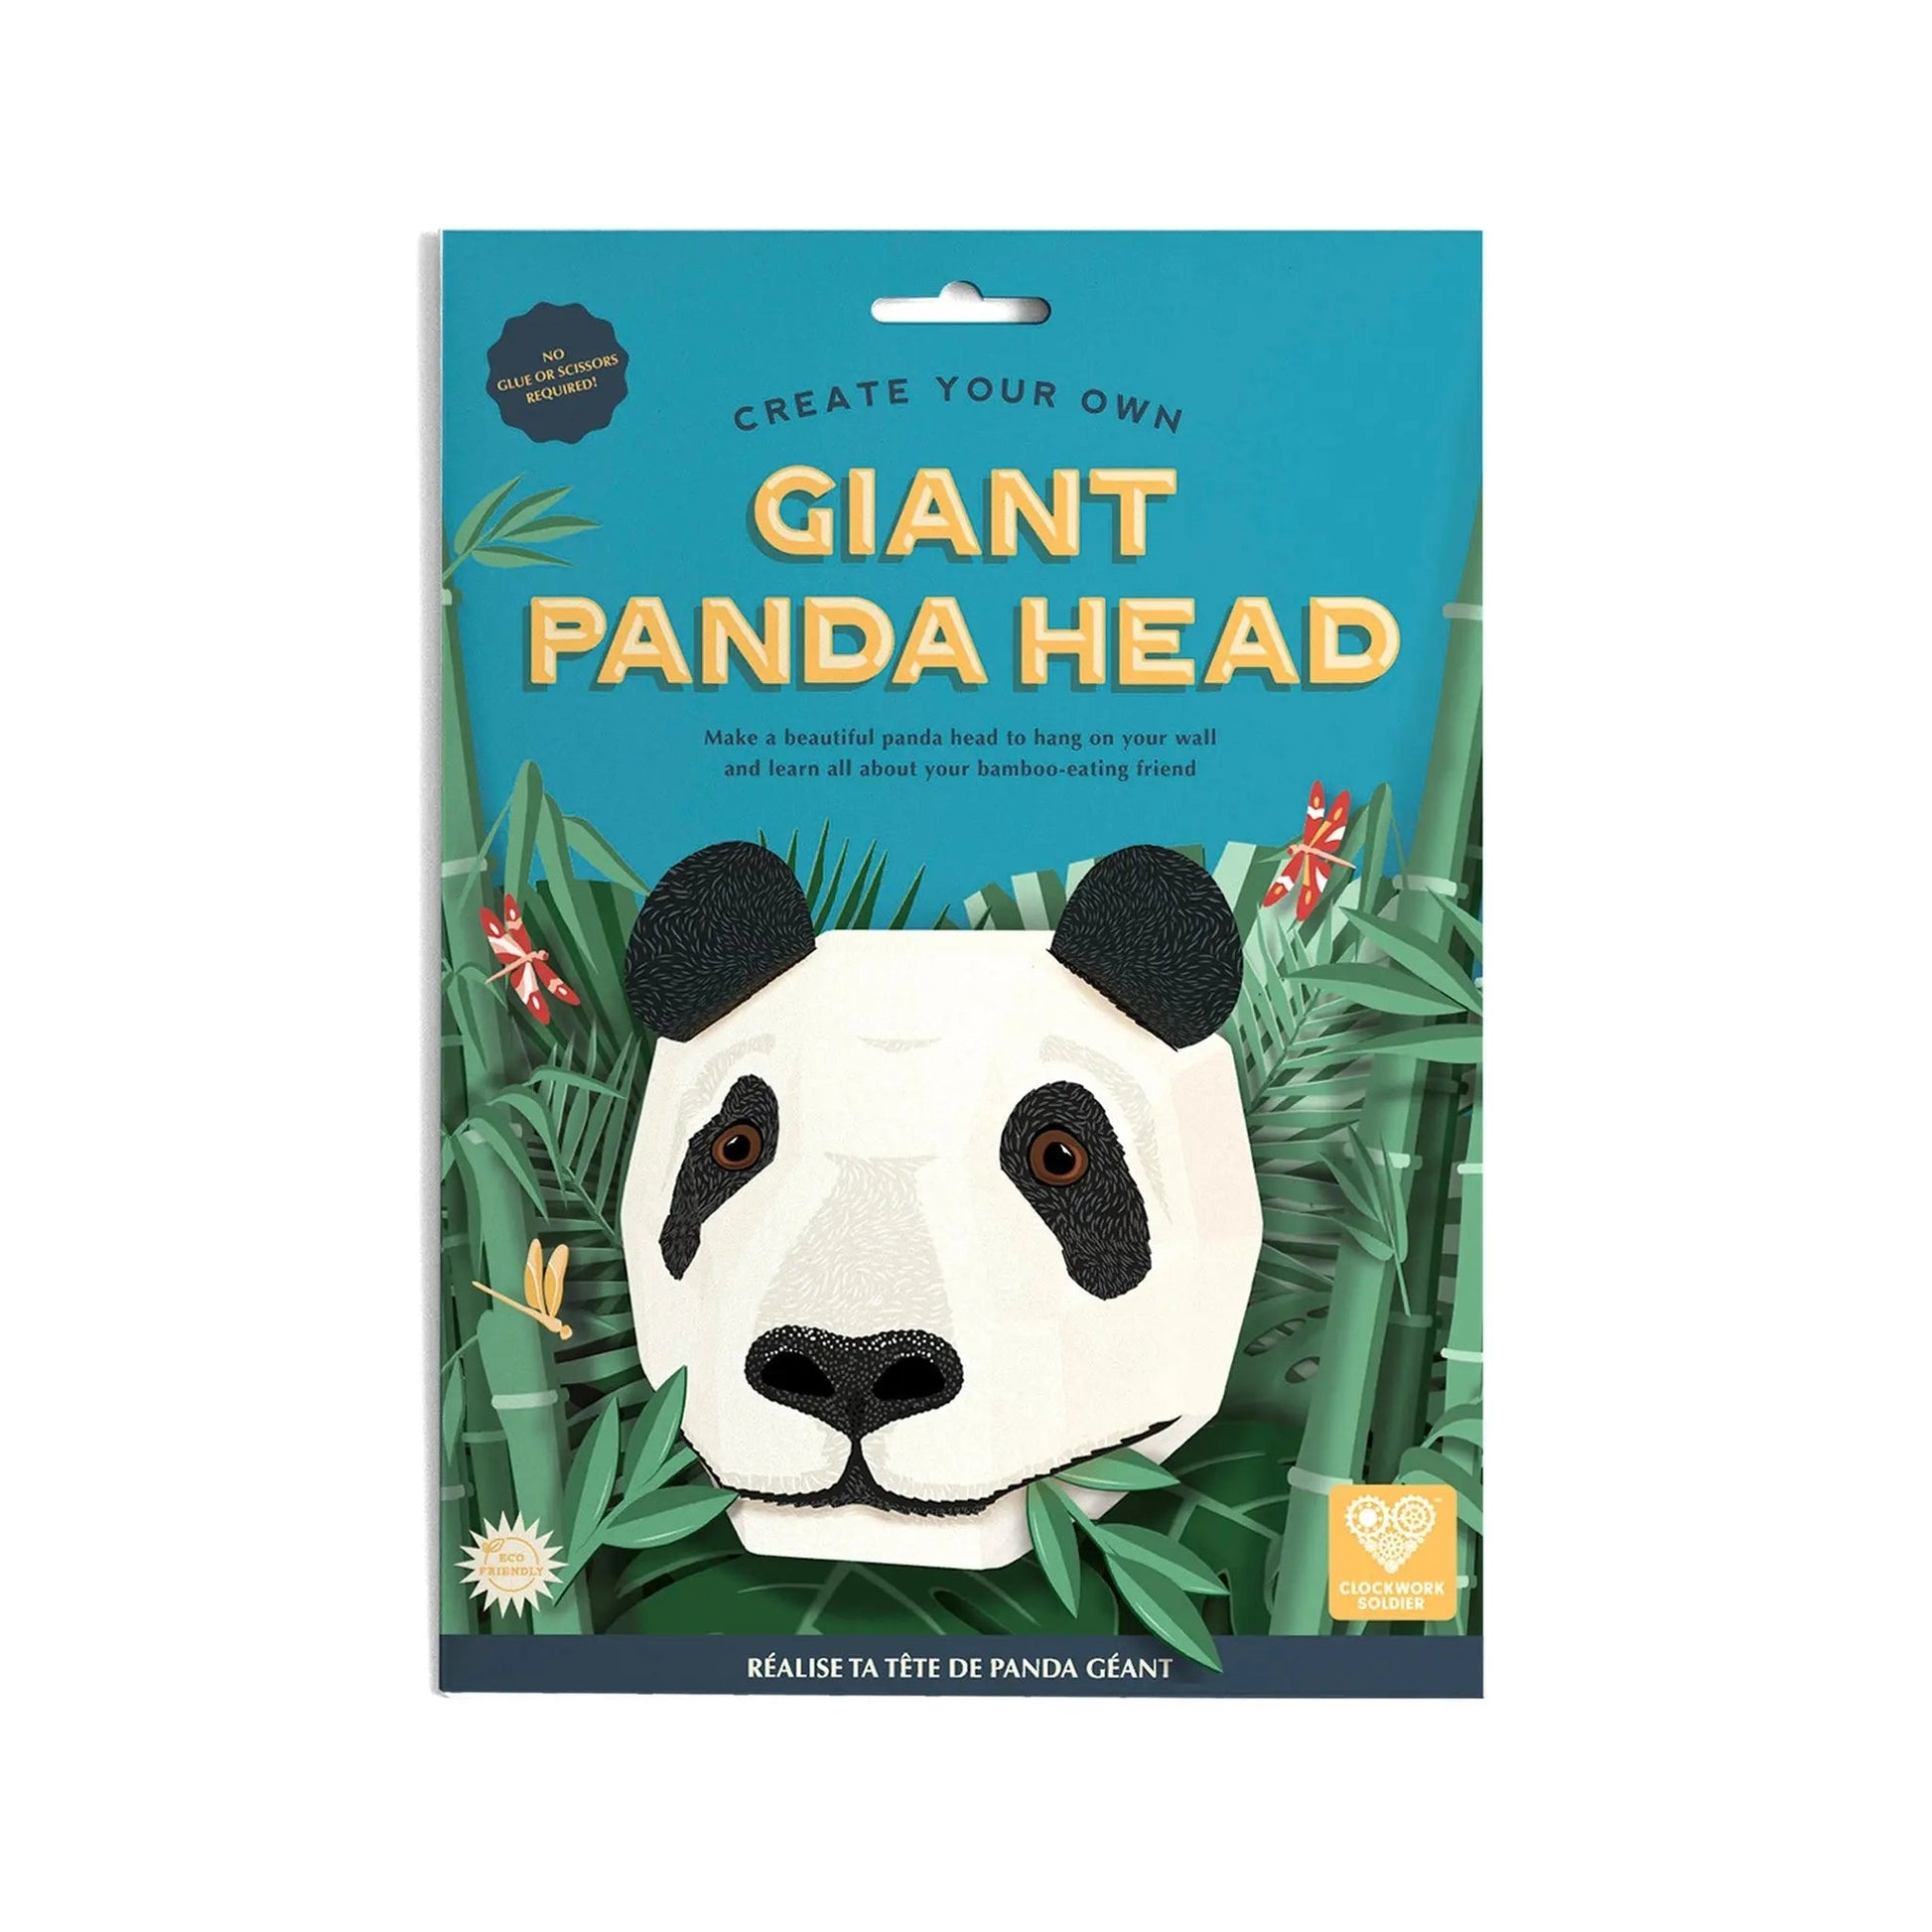 Create Your Own Giant Panda Head - Clockwork Soldier - The Forgotten Toy Shop